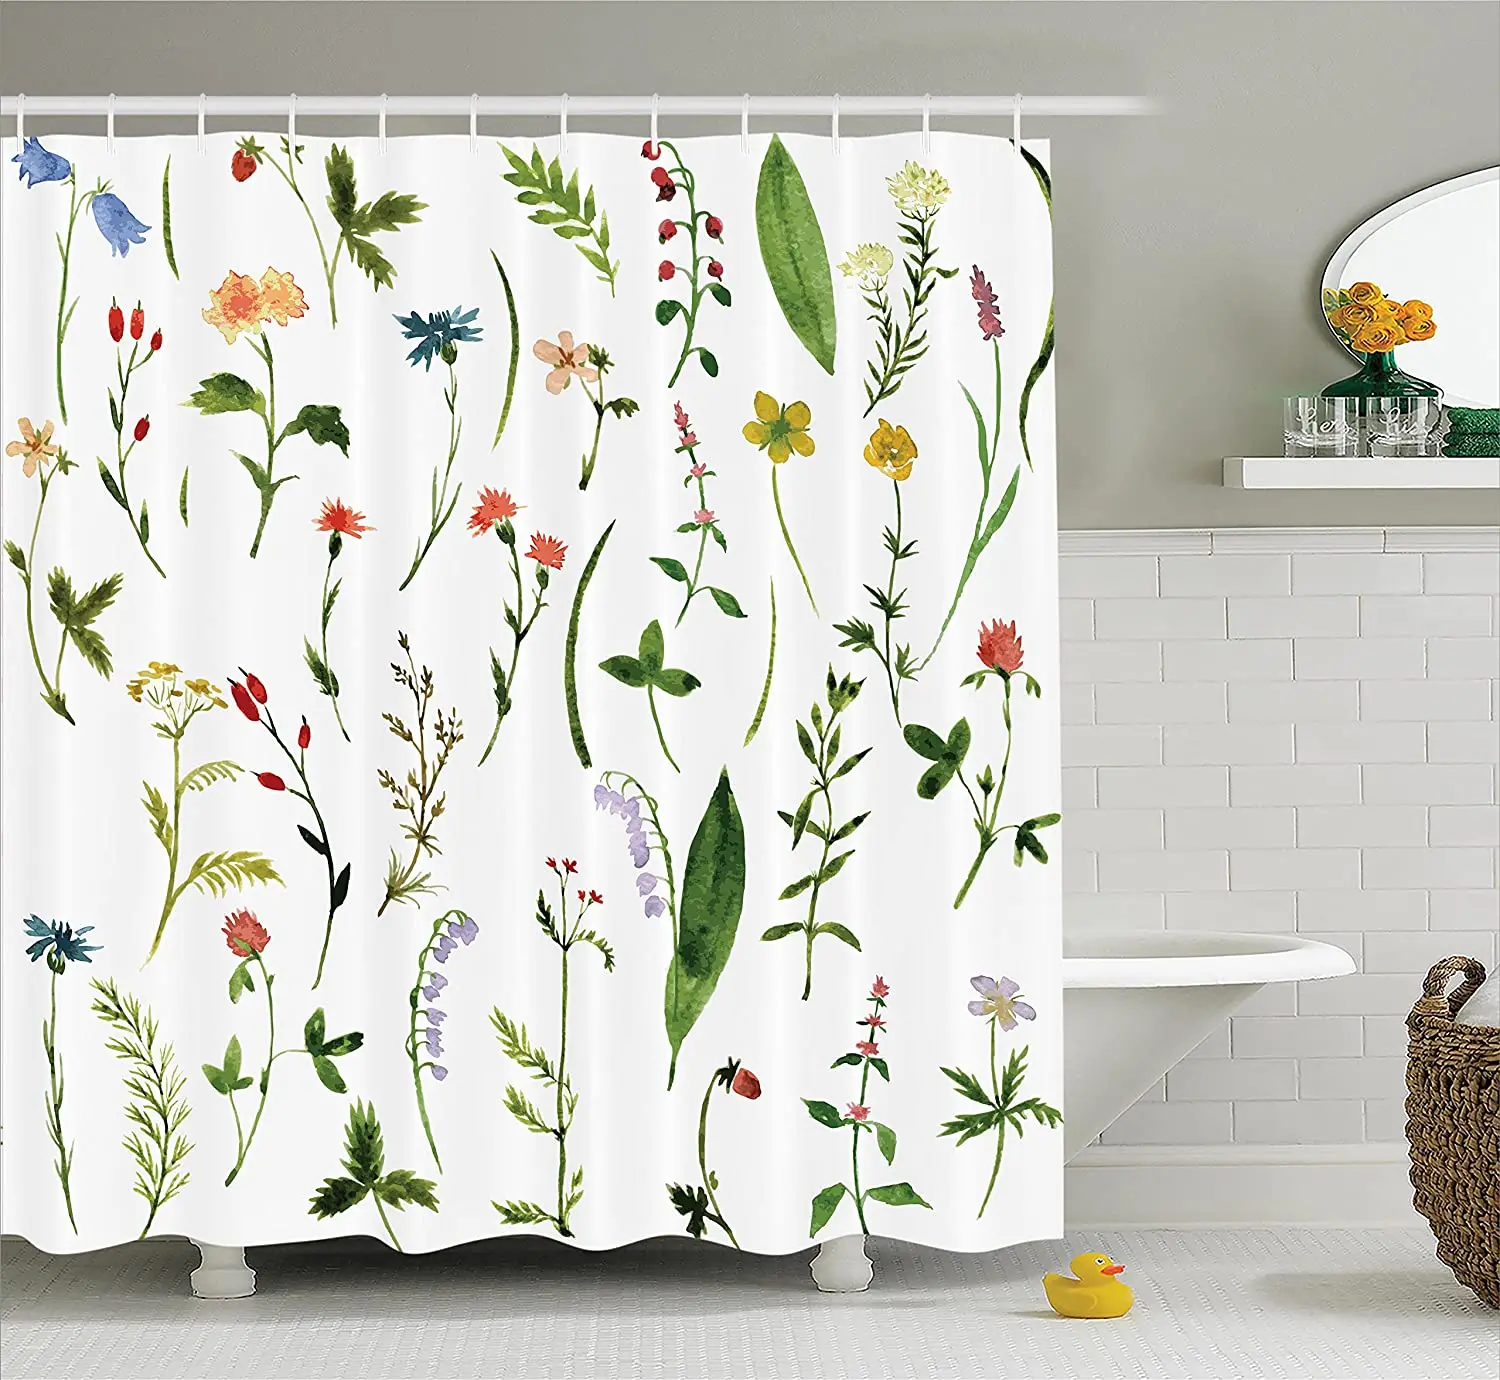 

Watercolor Flower Shower Curtain Set of Different Kind of Flowers and Herbs Weeds Plants Petite Nature Element Bath Curtains